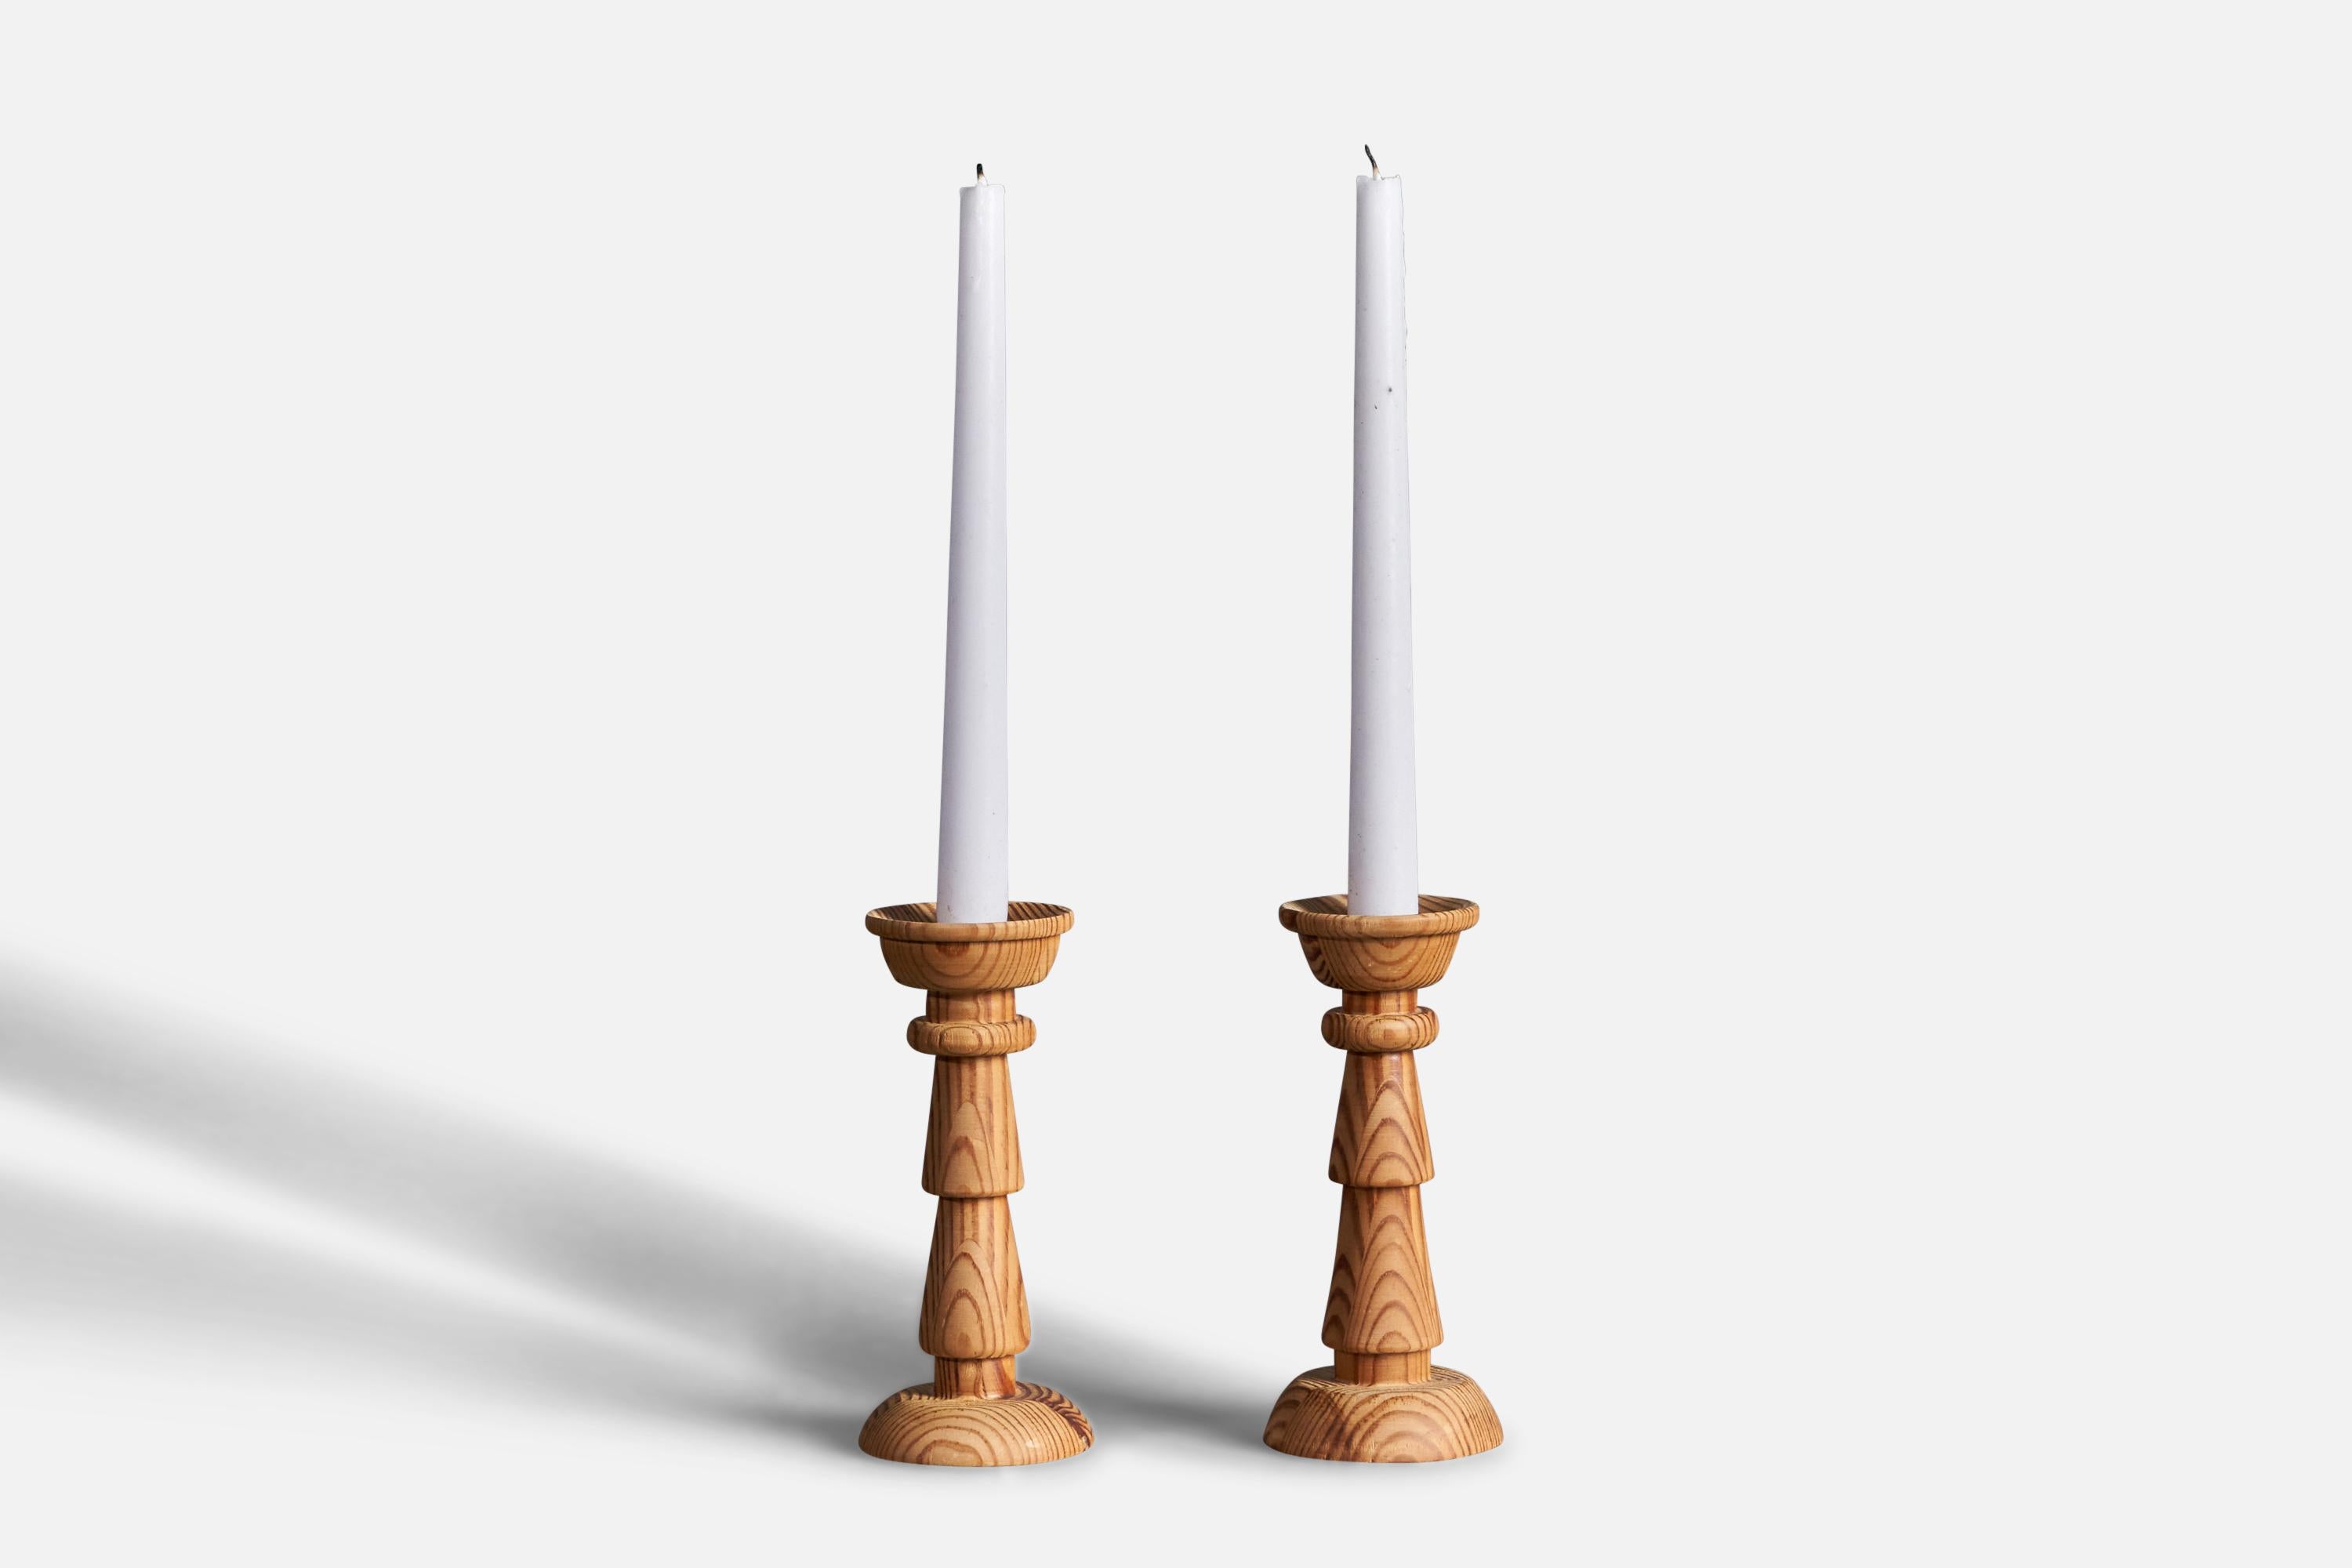 A pair of turned pine candlesticks designed and produced in Sweden, 1970s.